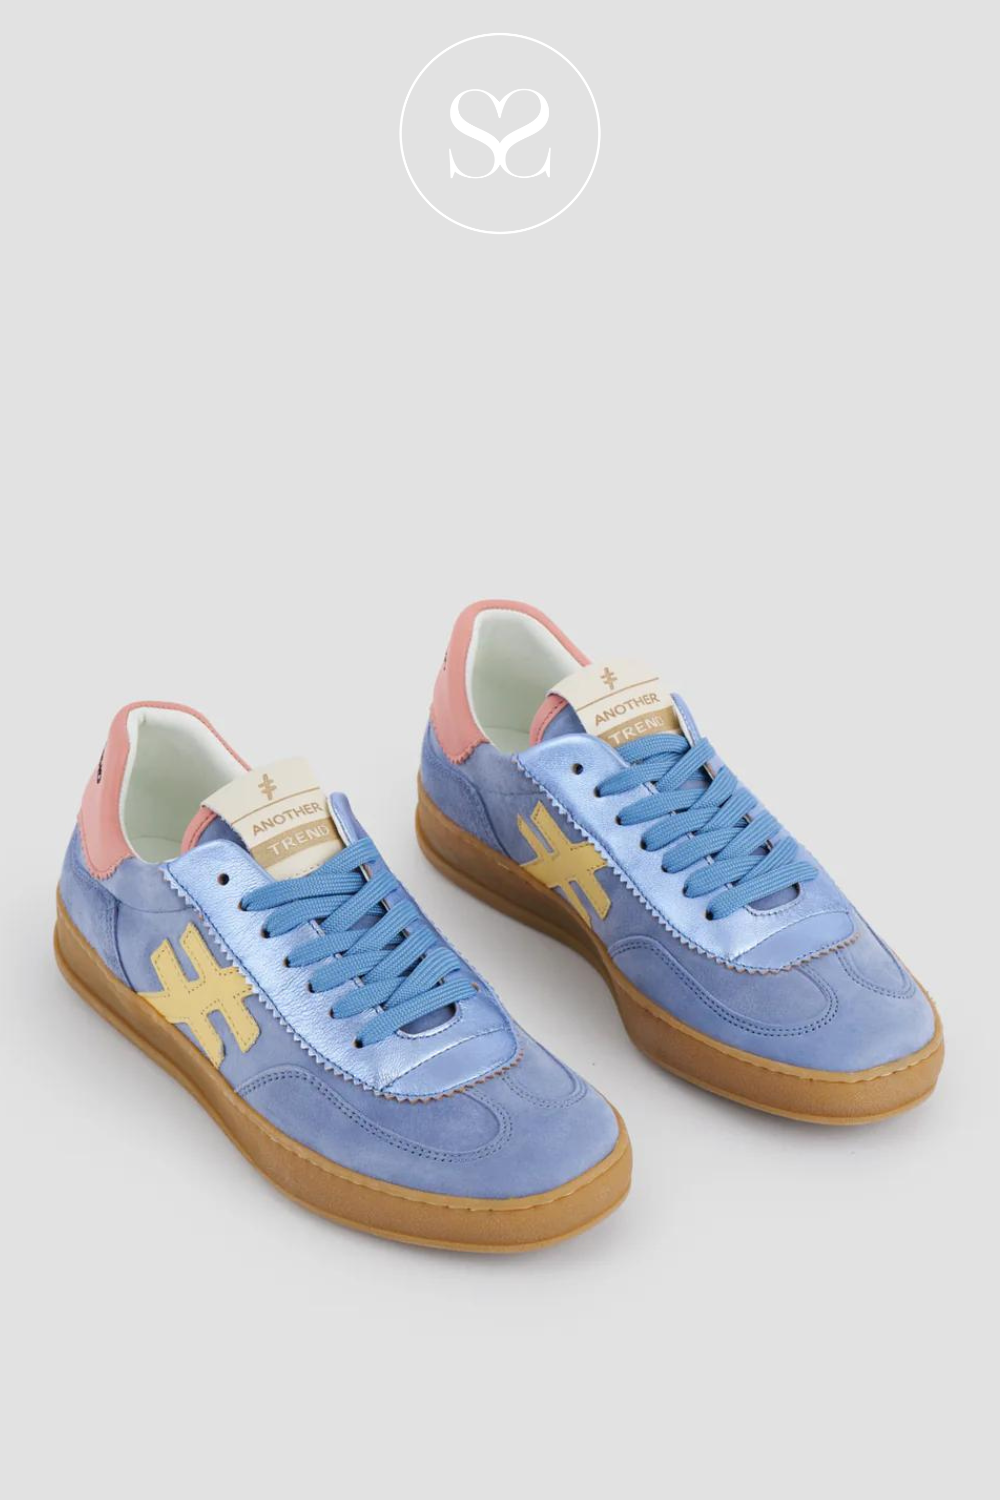 ANOTHER TREND ICONIC BLUE AND BABY PINK LEATHER TRAINER